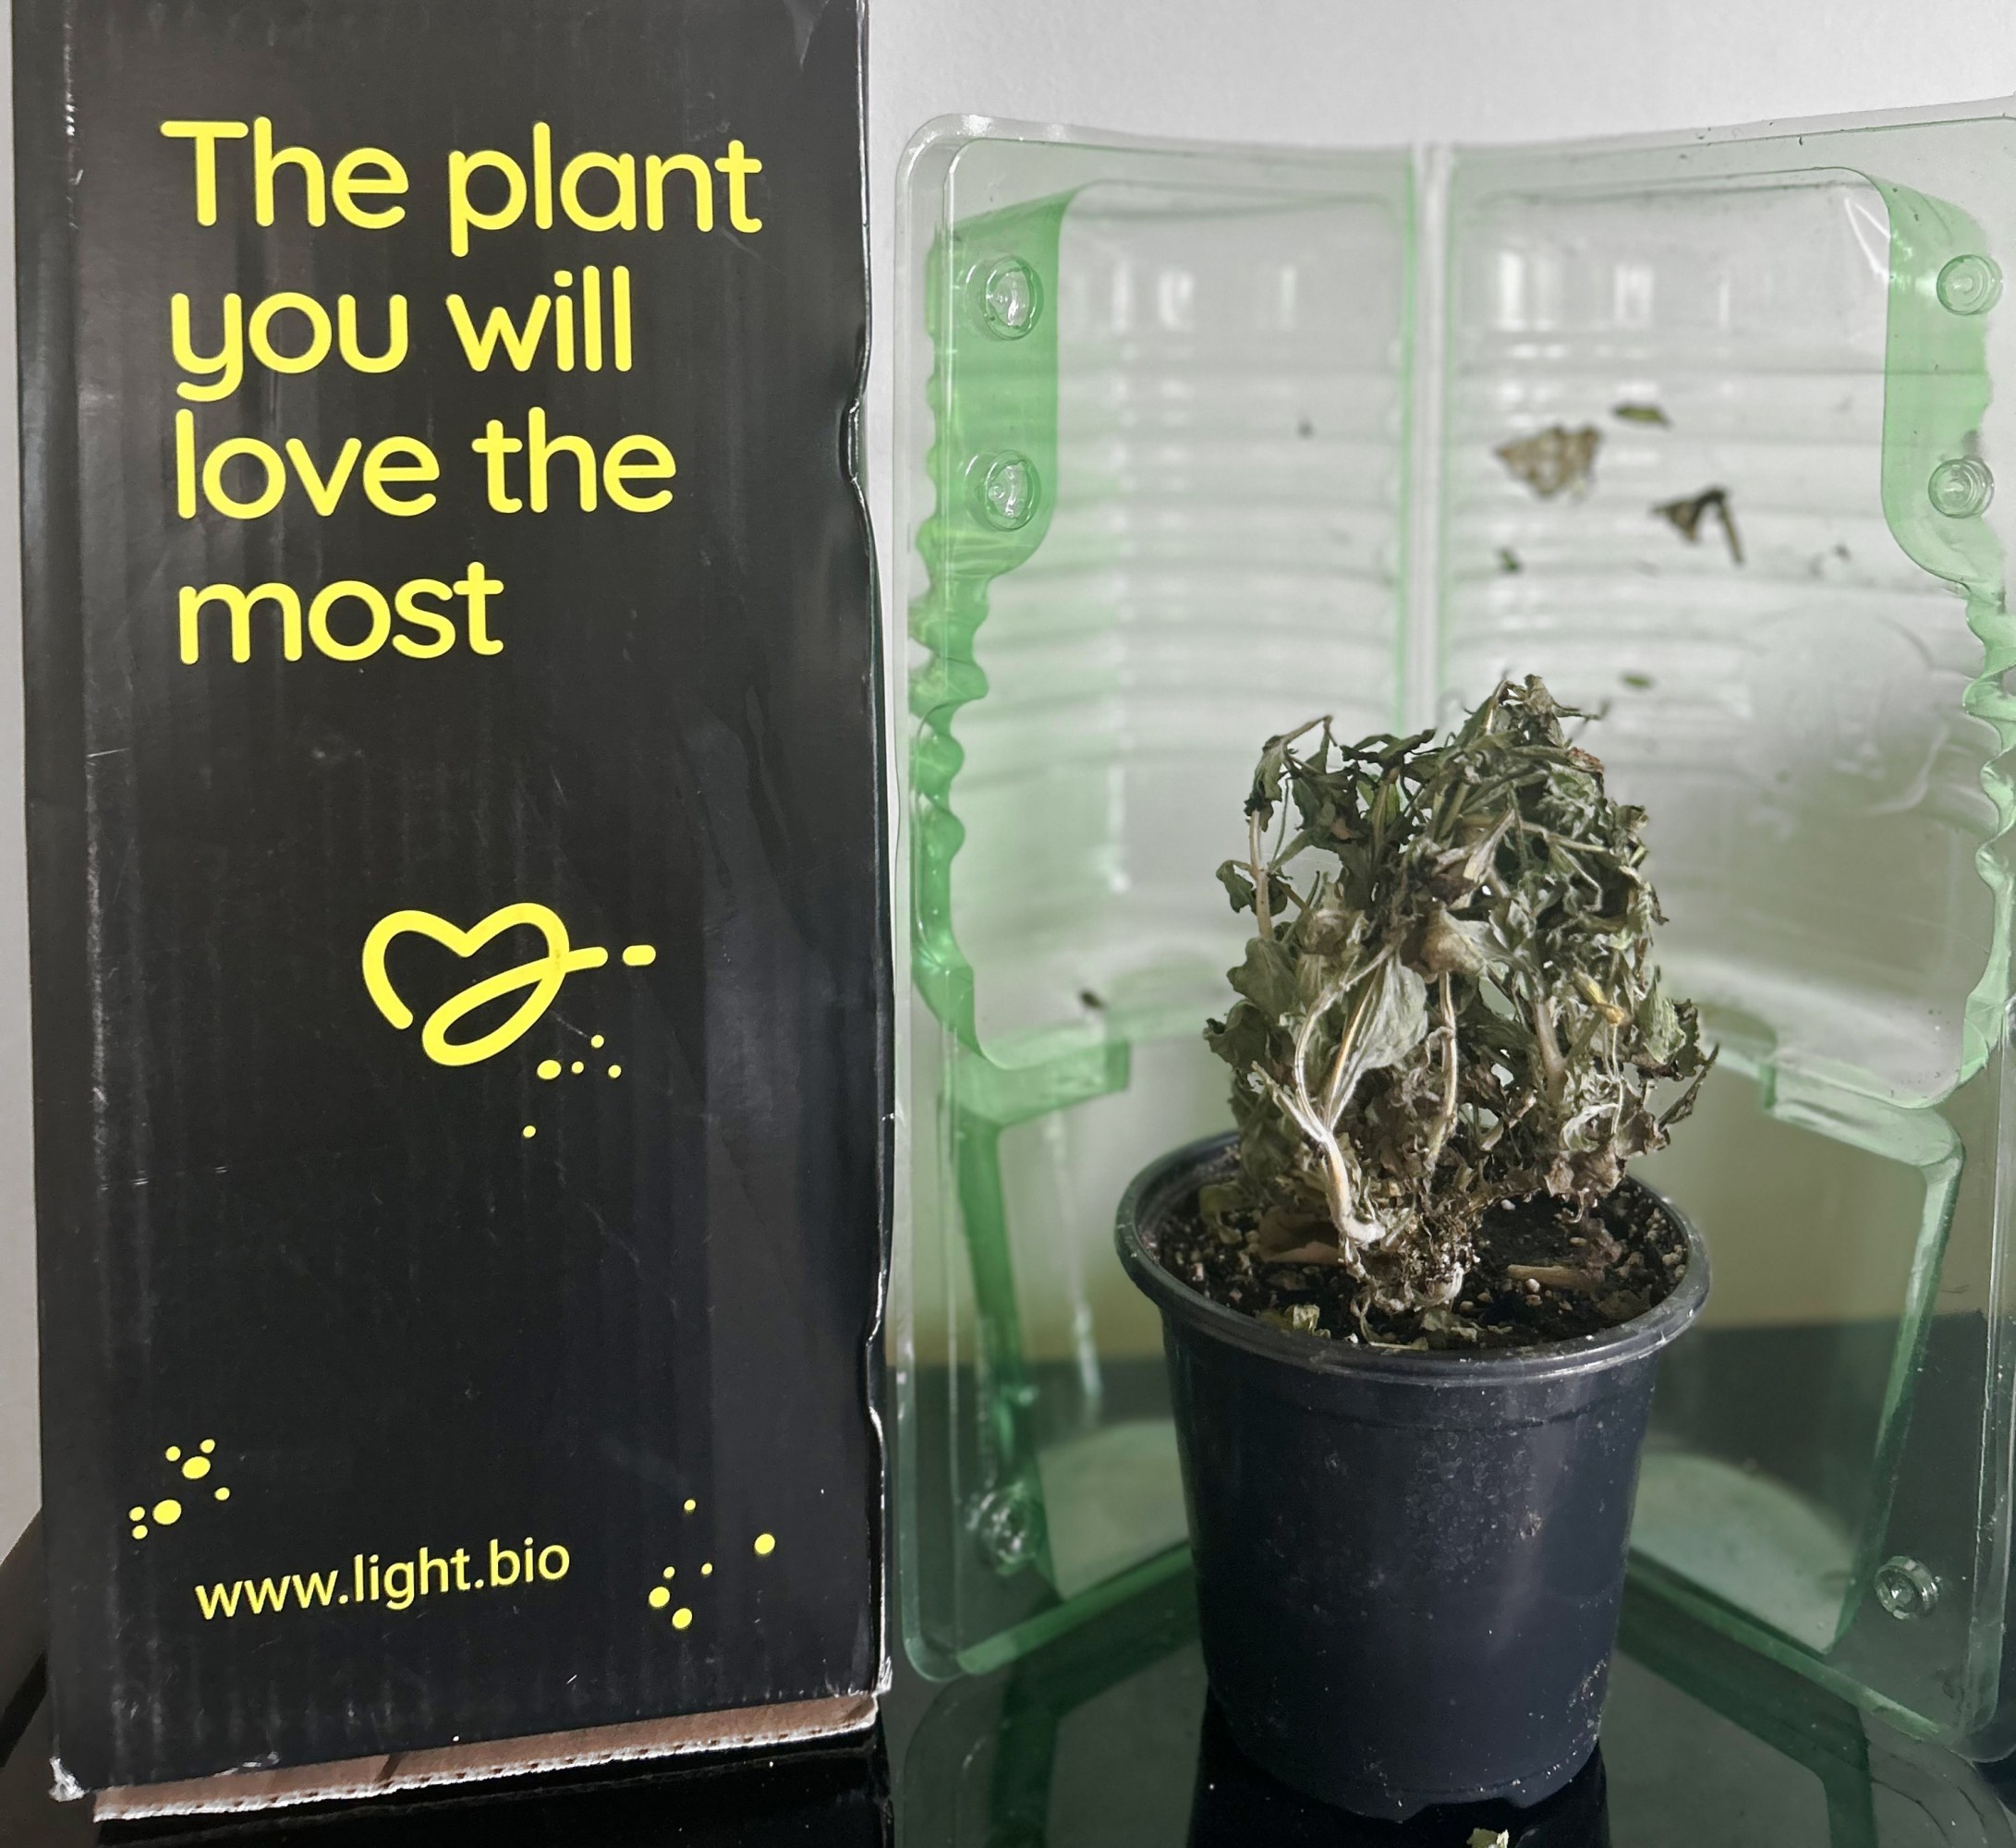 Dead potted petunia next to it's packaging, which reads "The plant you will love the most. www.light.bio"